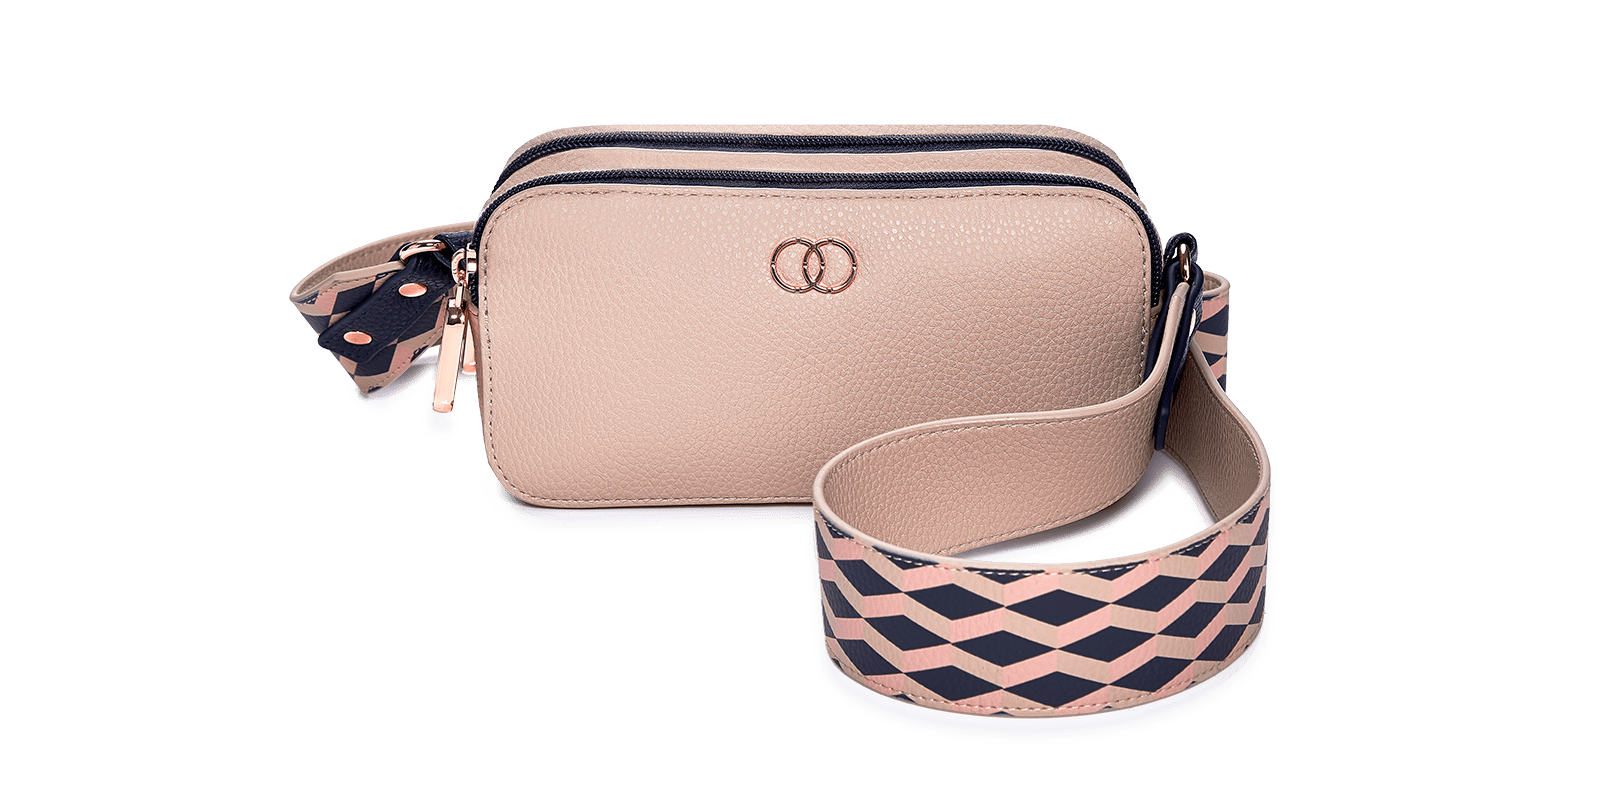 Dual Compartment Cell Phone & Essentials Purse Navy & Oat Caboodles Life & Style Crossbody Clutch 